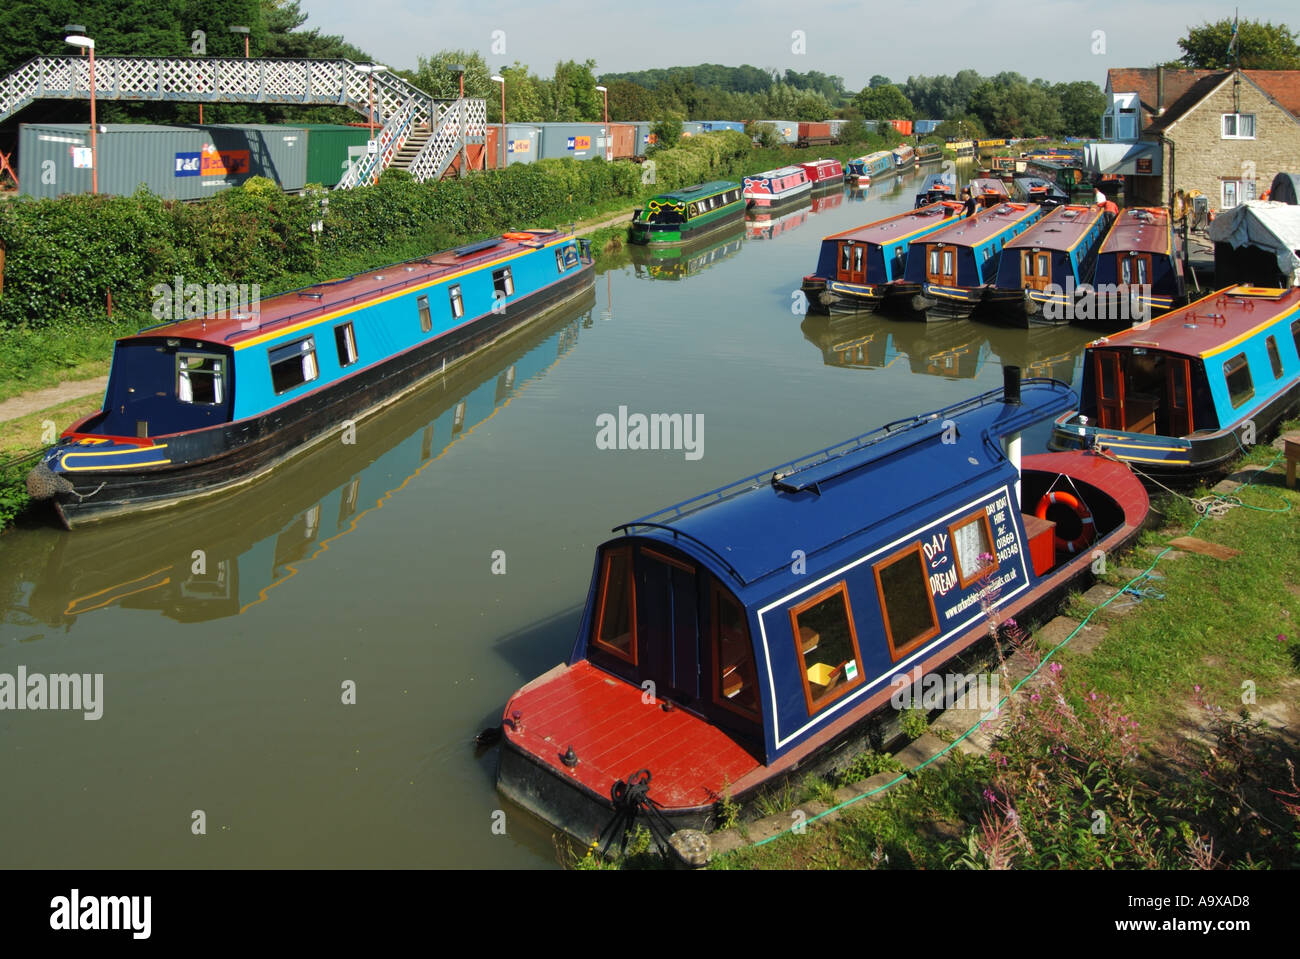 Lower Heyford station shipping container freight train & footbridge compare narrowboat pleasure use on old Oxford Canal built for cargo Oxfordshire UK Stock Photo